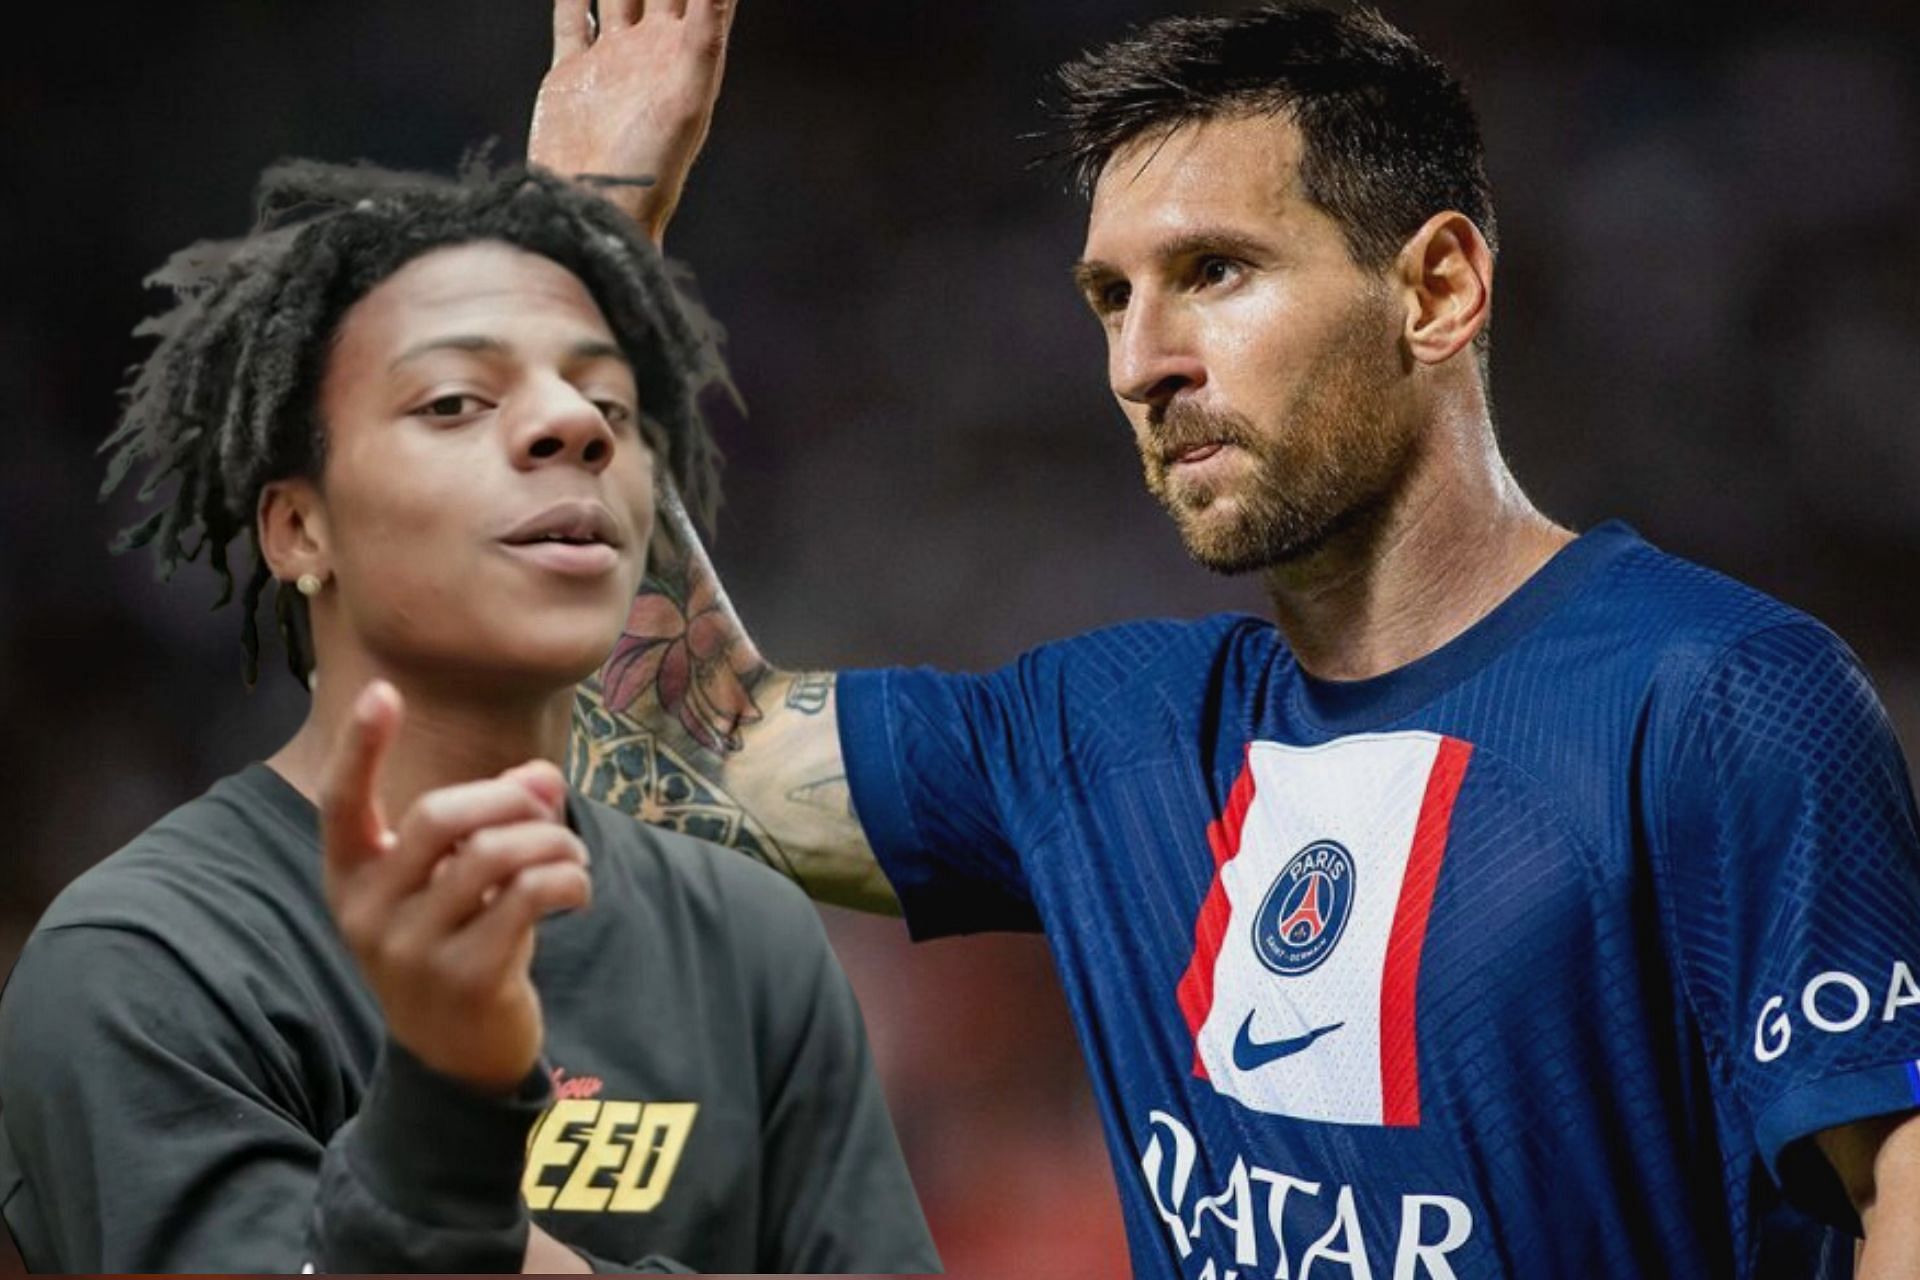 IShowSpeed: Why did Lionel Messi block popular r on Instagram?